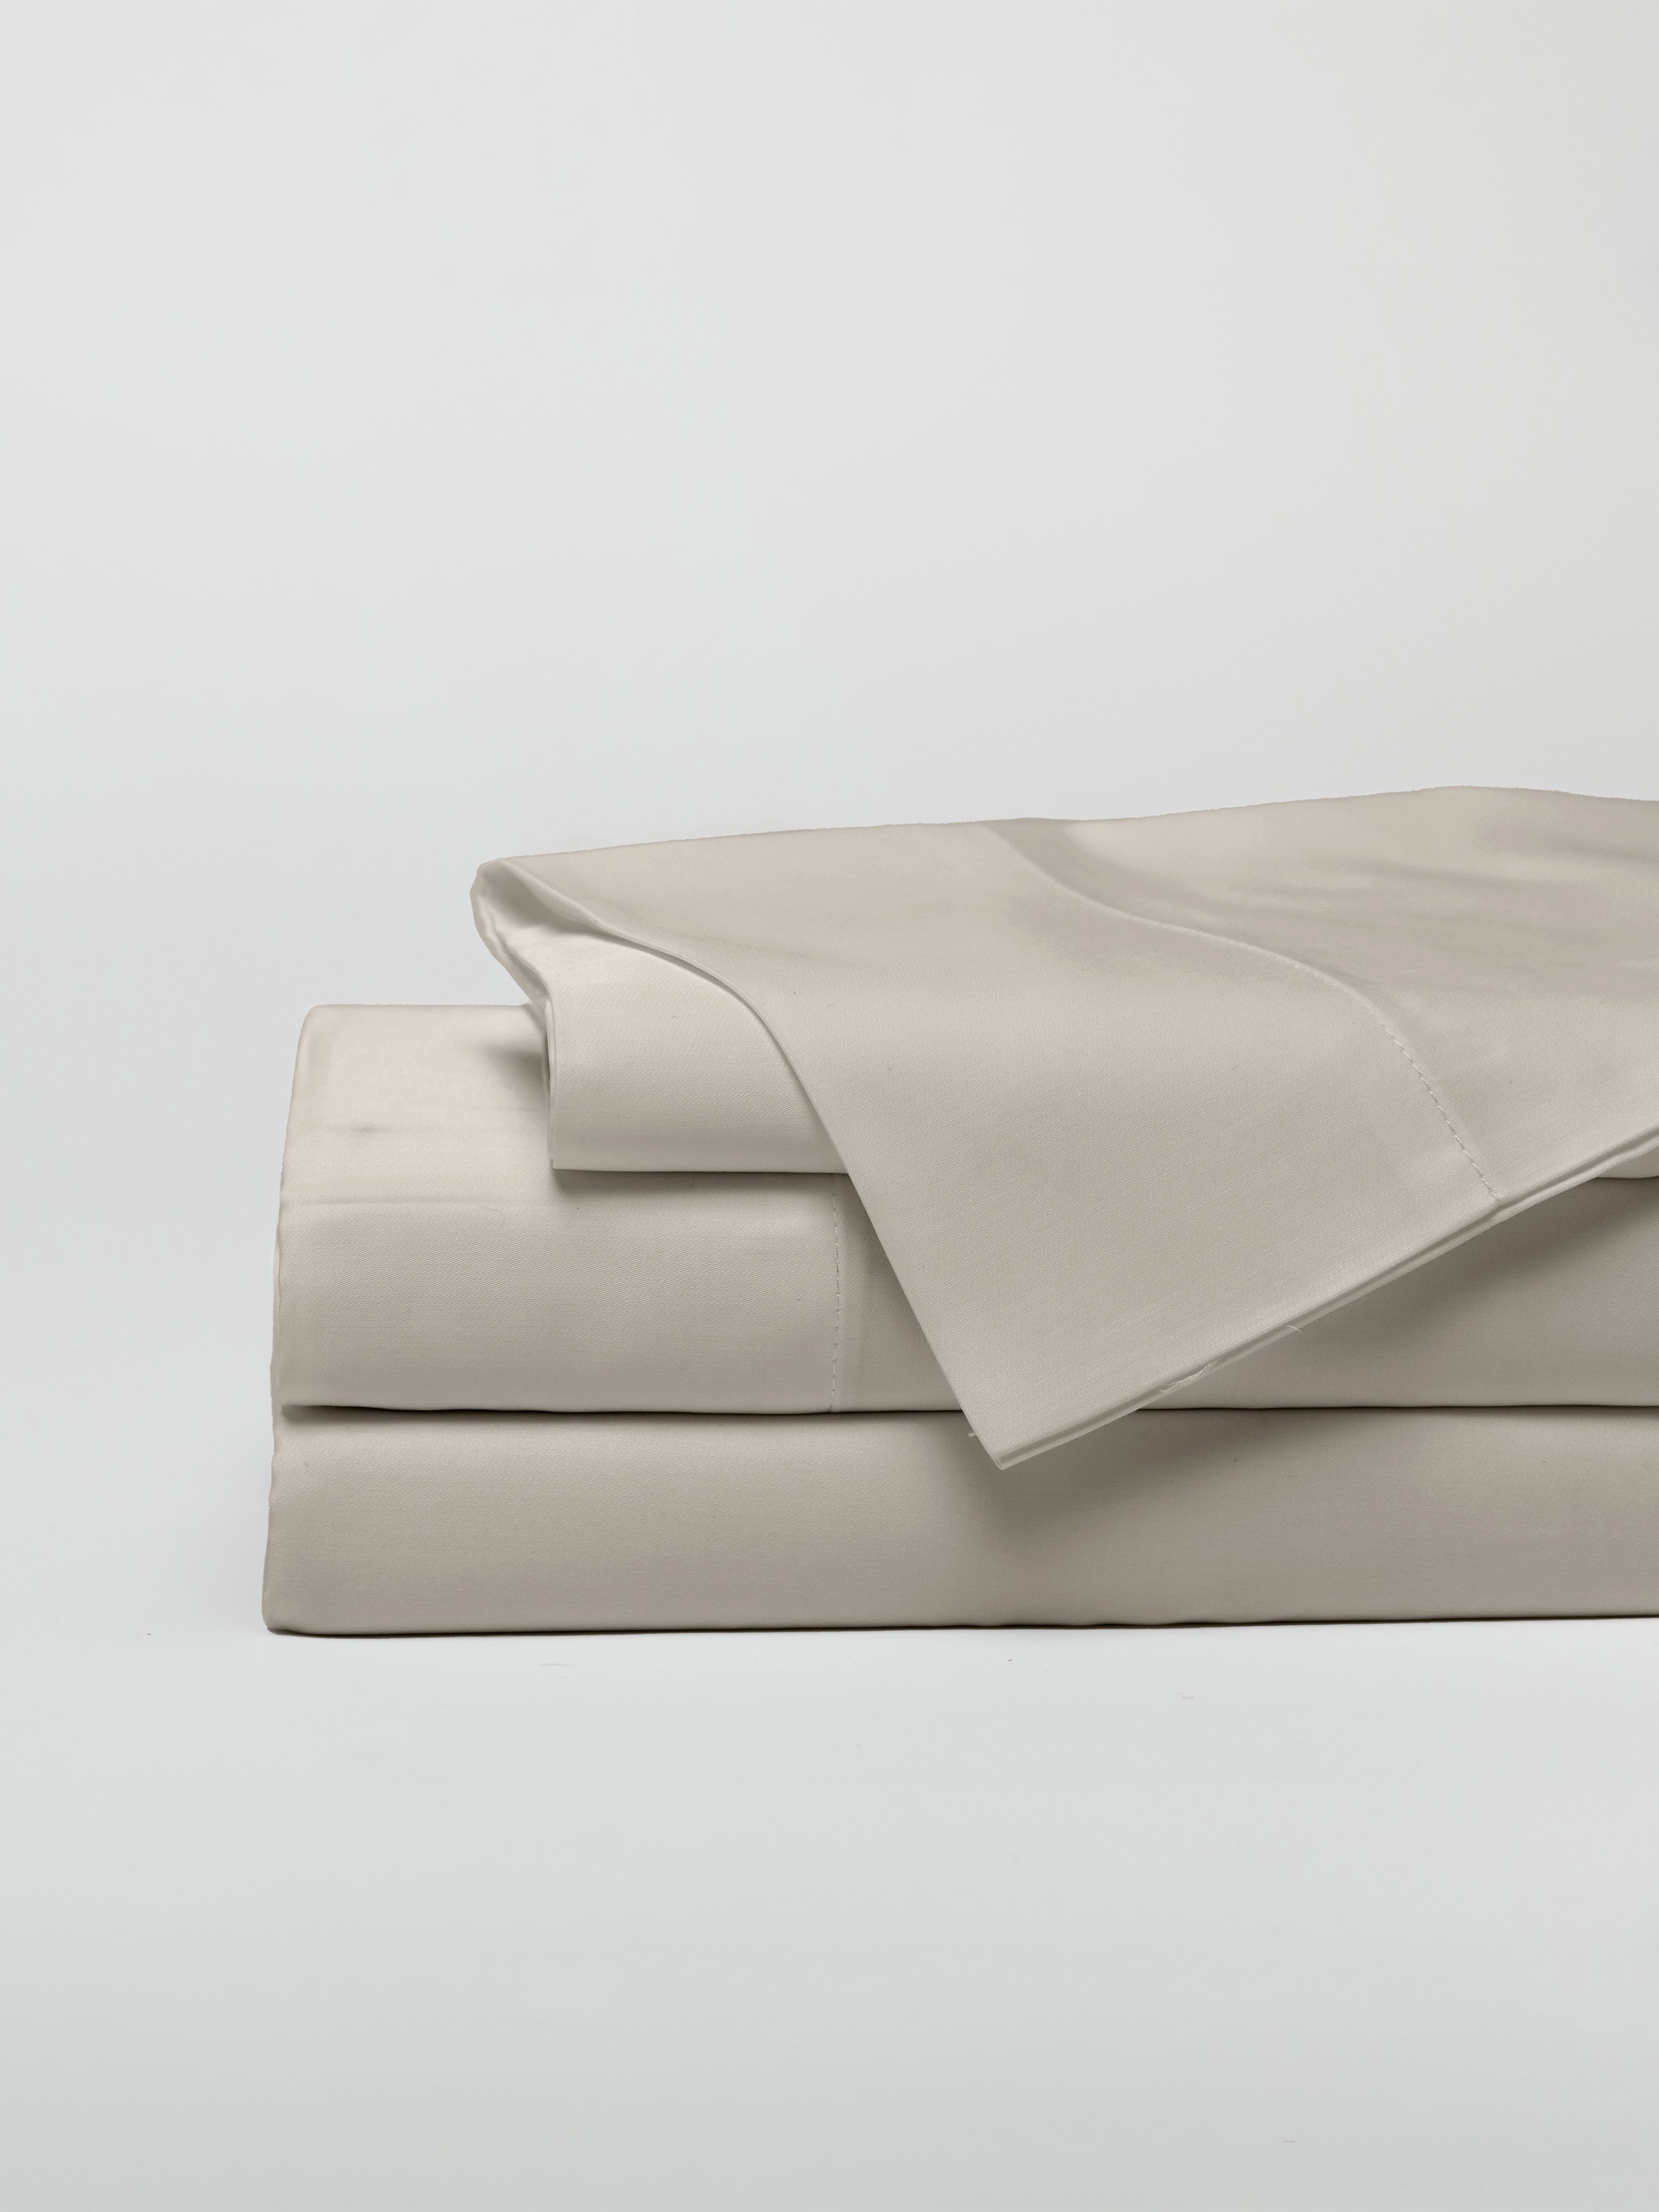 Birch bamboo jersey sheet set folded with white background |Color:Birch